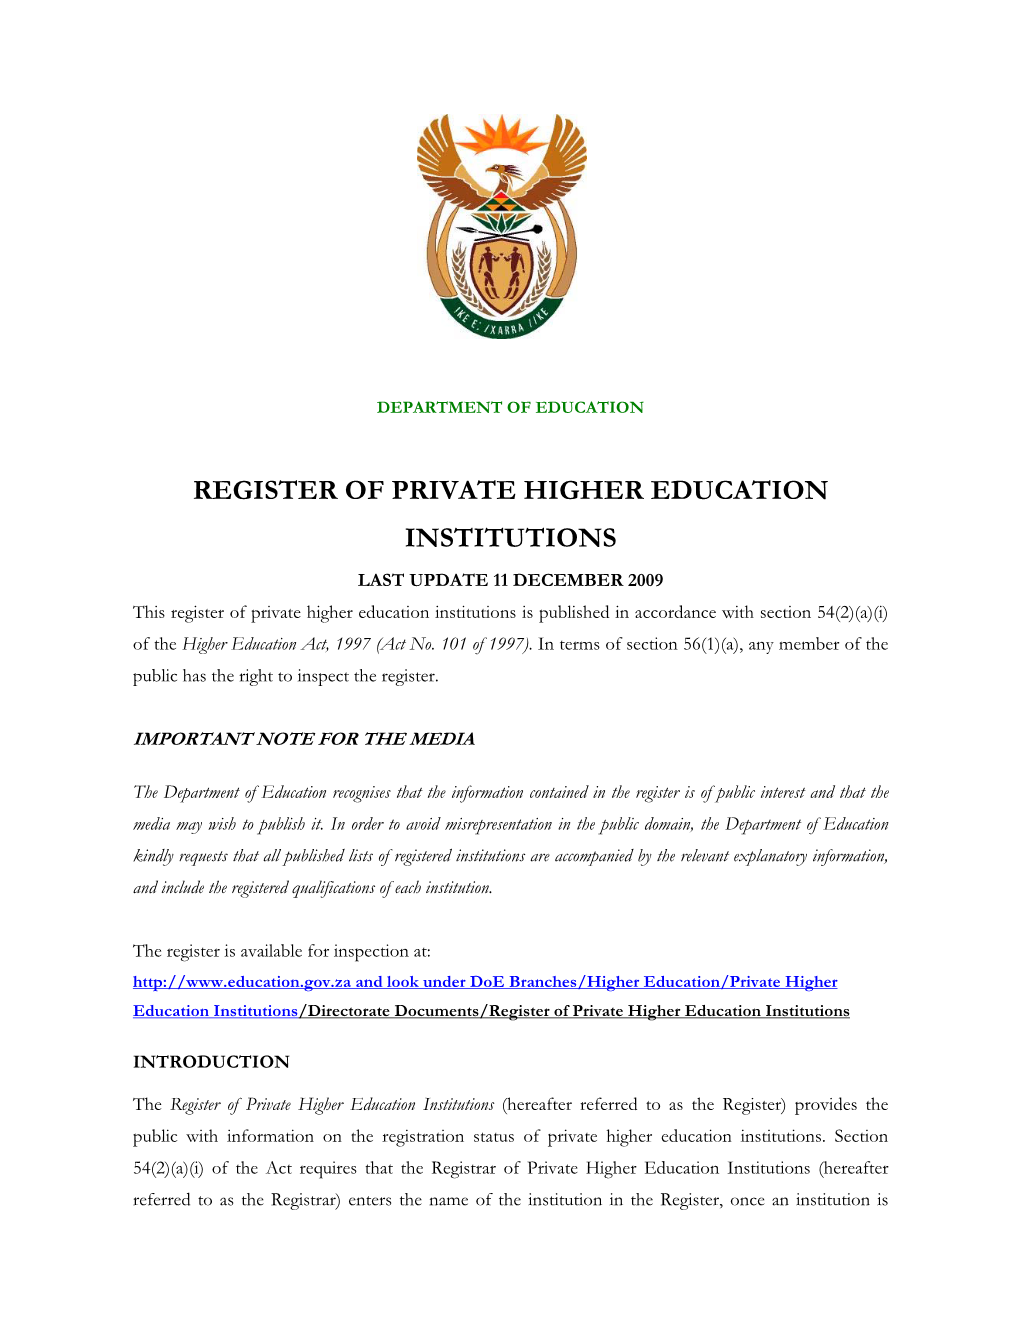 Register of Private Higher Education Institutions